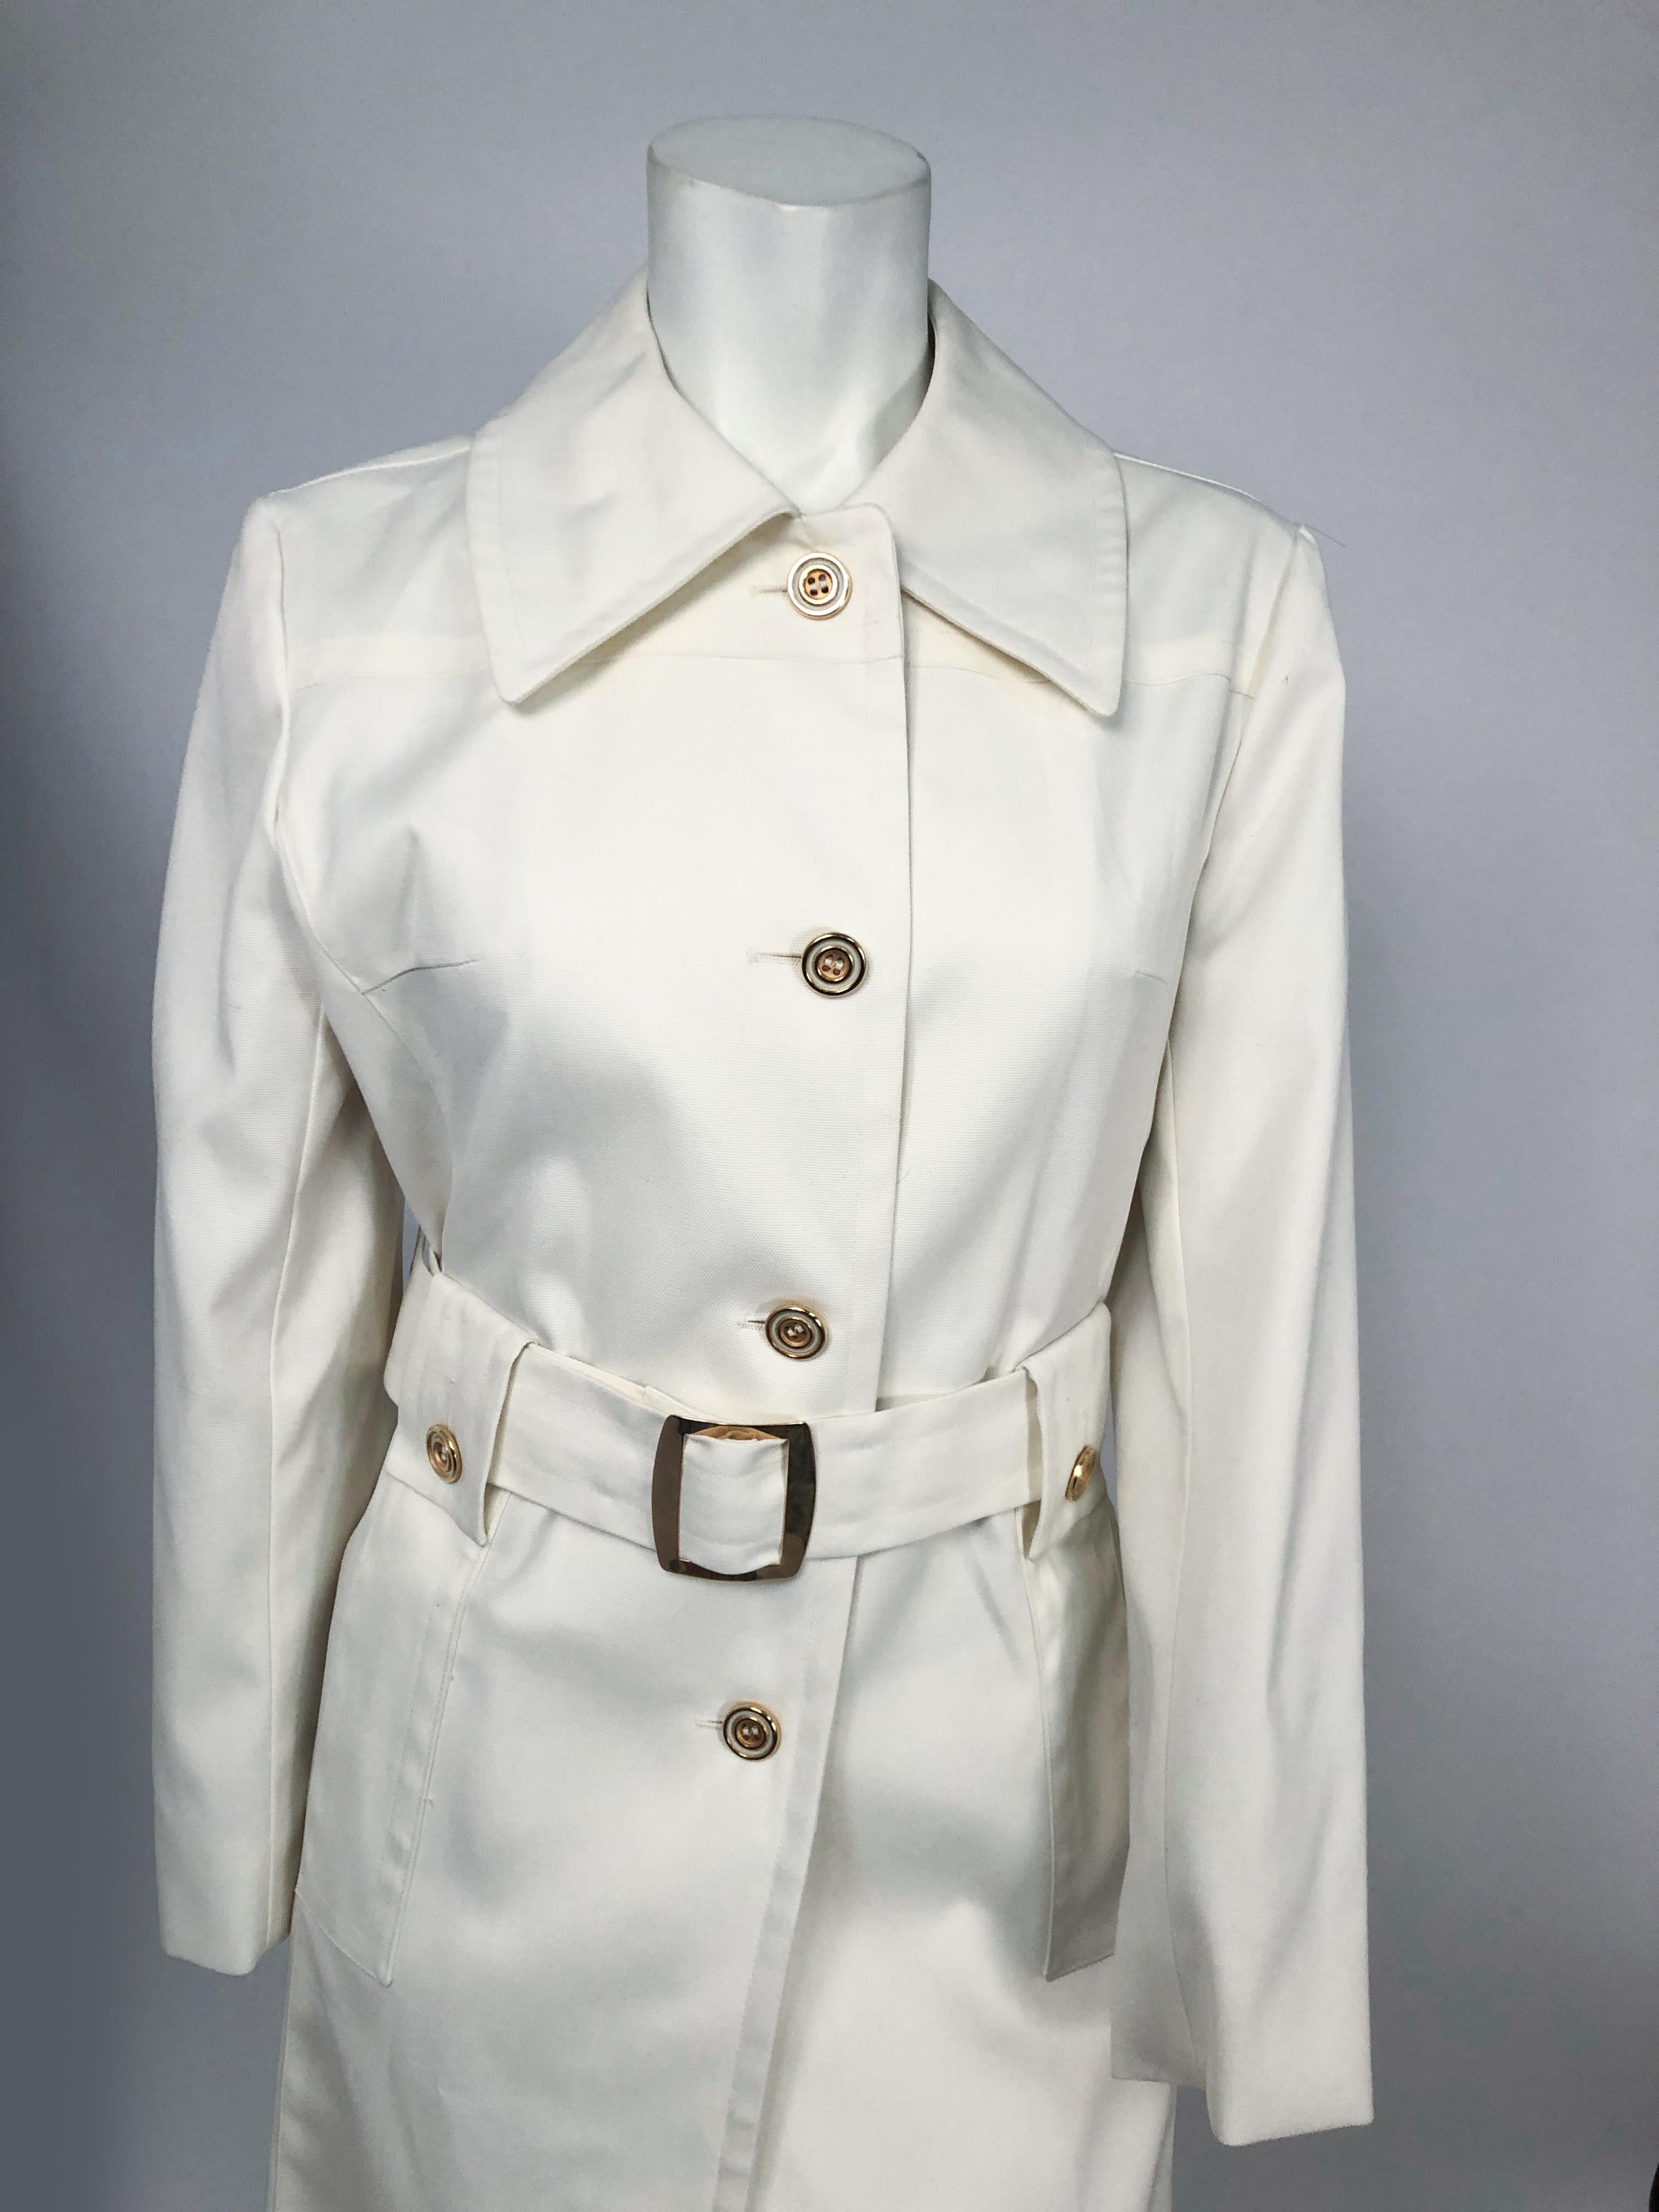 1970s London Fog Cream Trench with brass buttons/buckle, wide collar, and pockets.